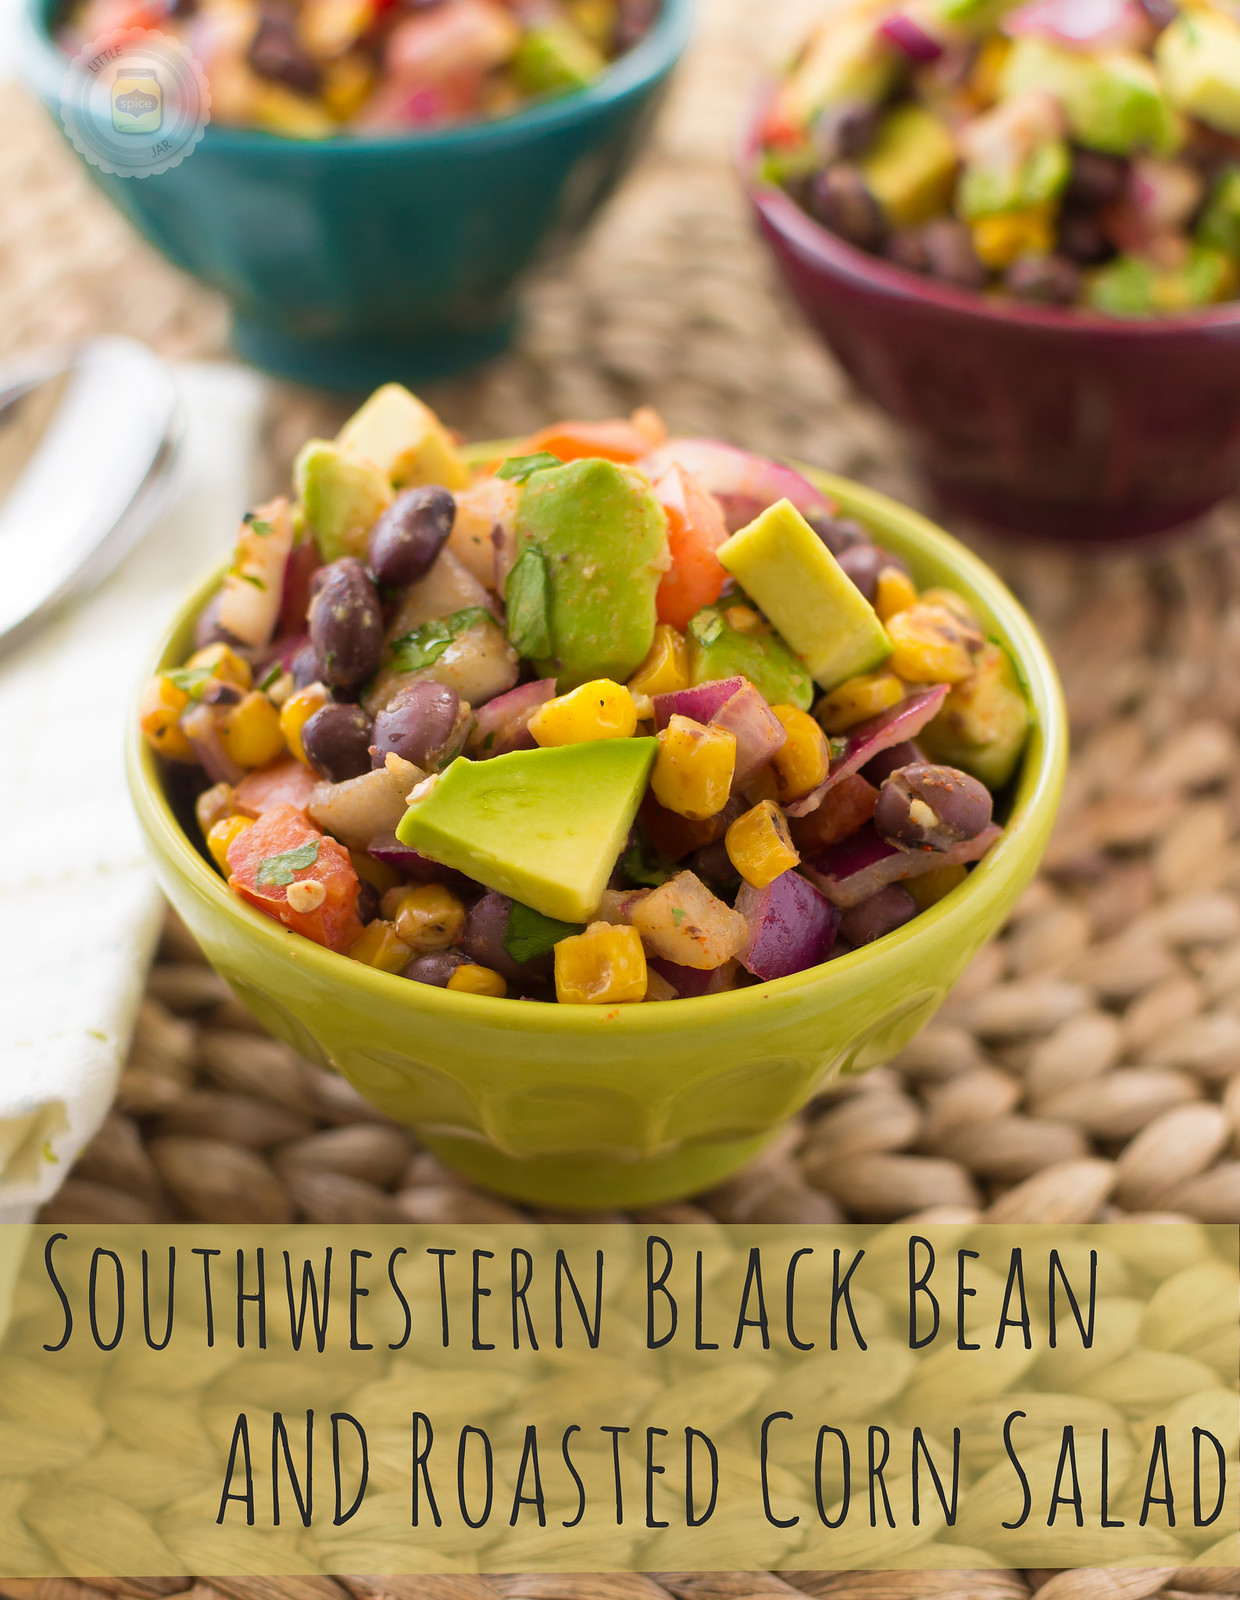 Southwestern Black Bean and Roasted Corn Salad text